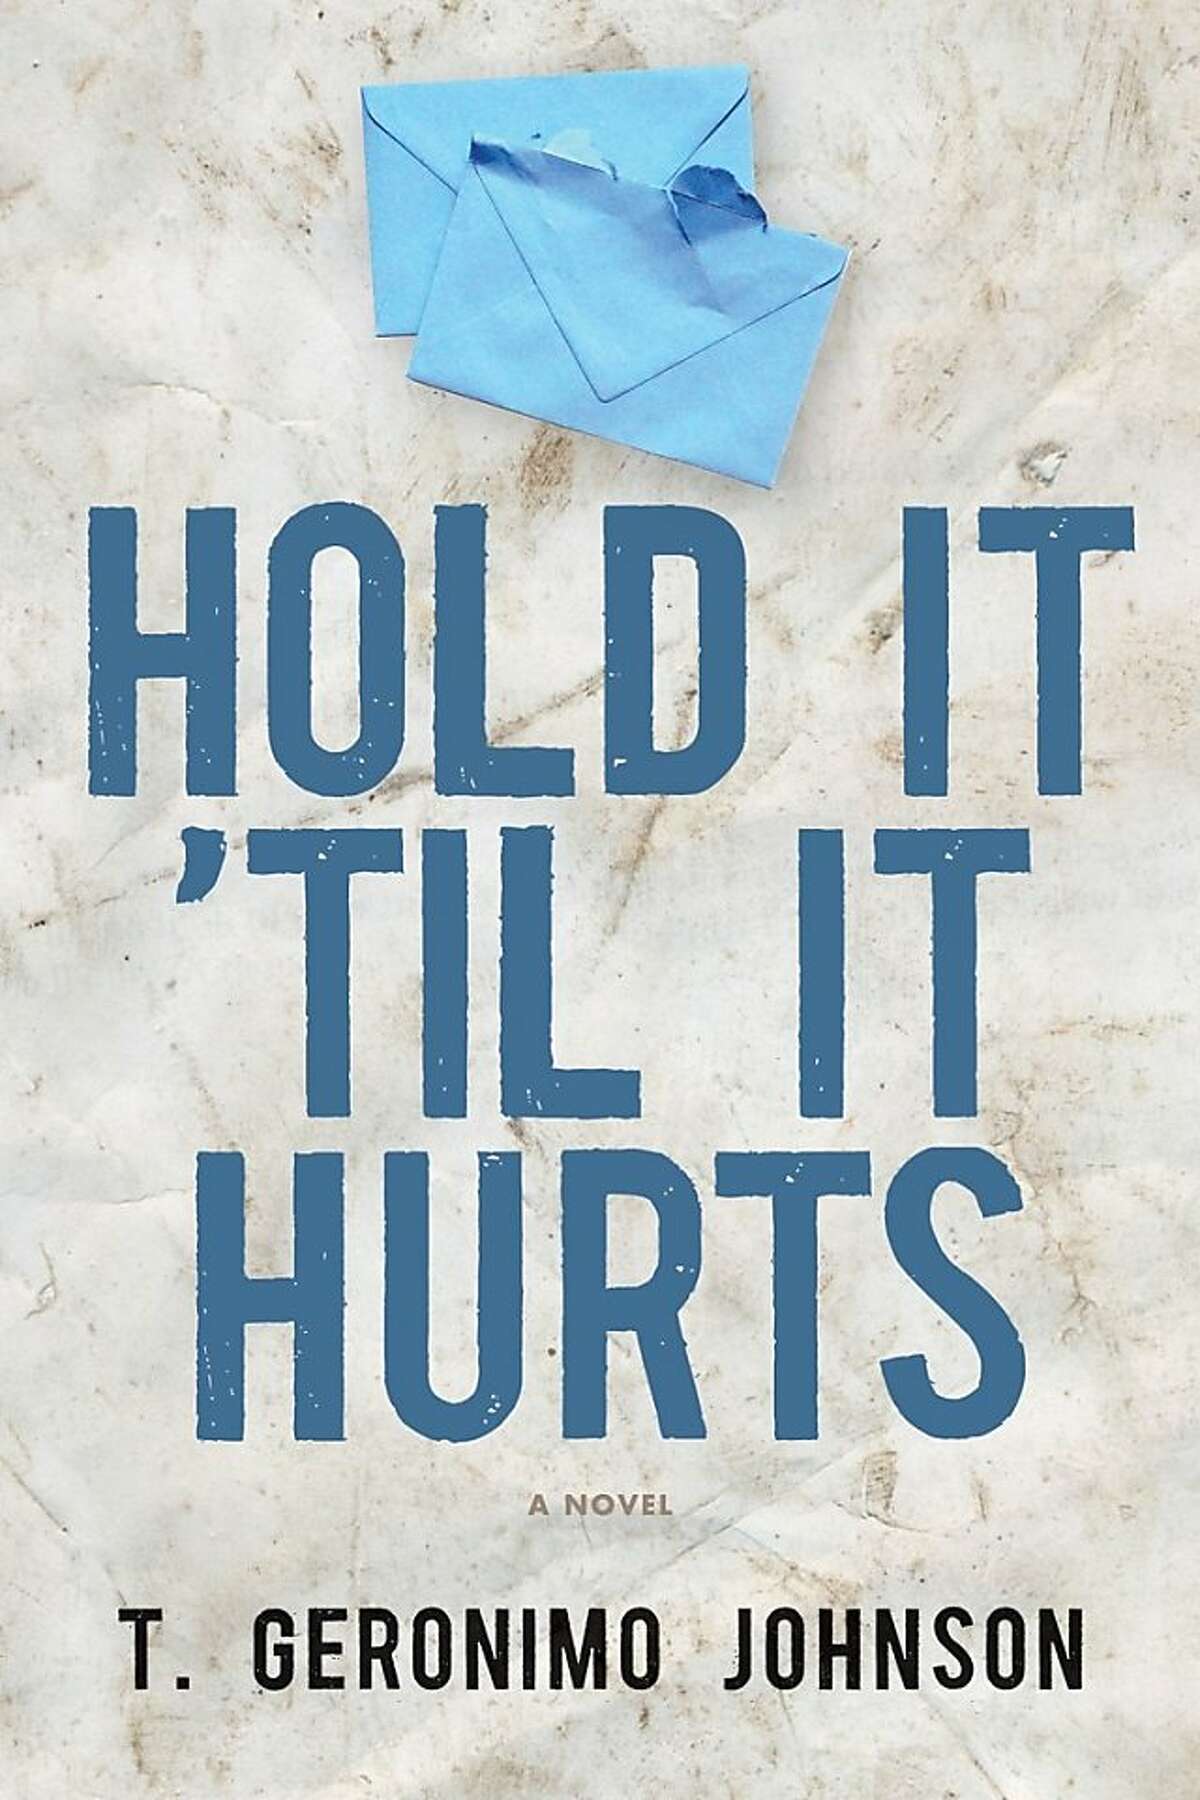 Hold It 'Til It Hurts, by T. Geronimo Johnson